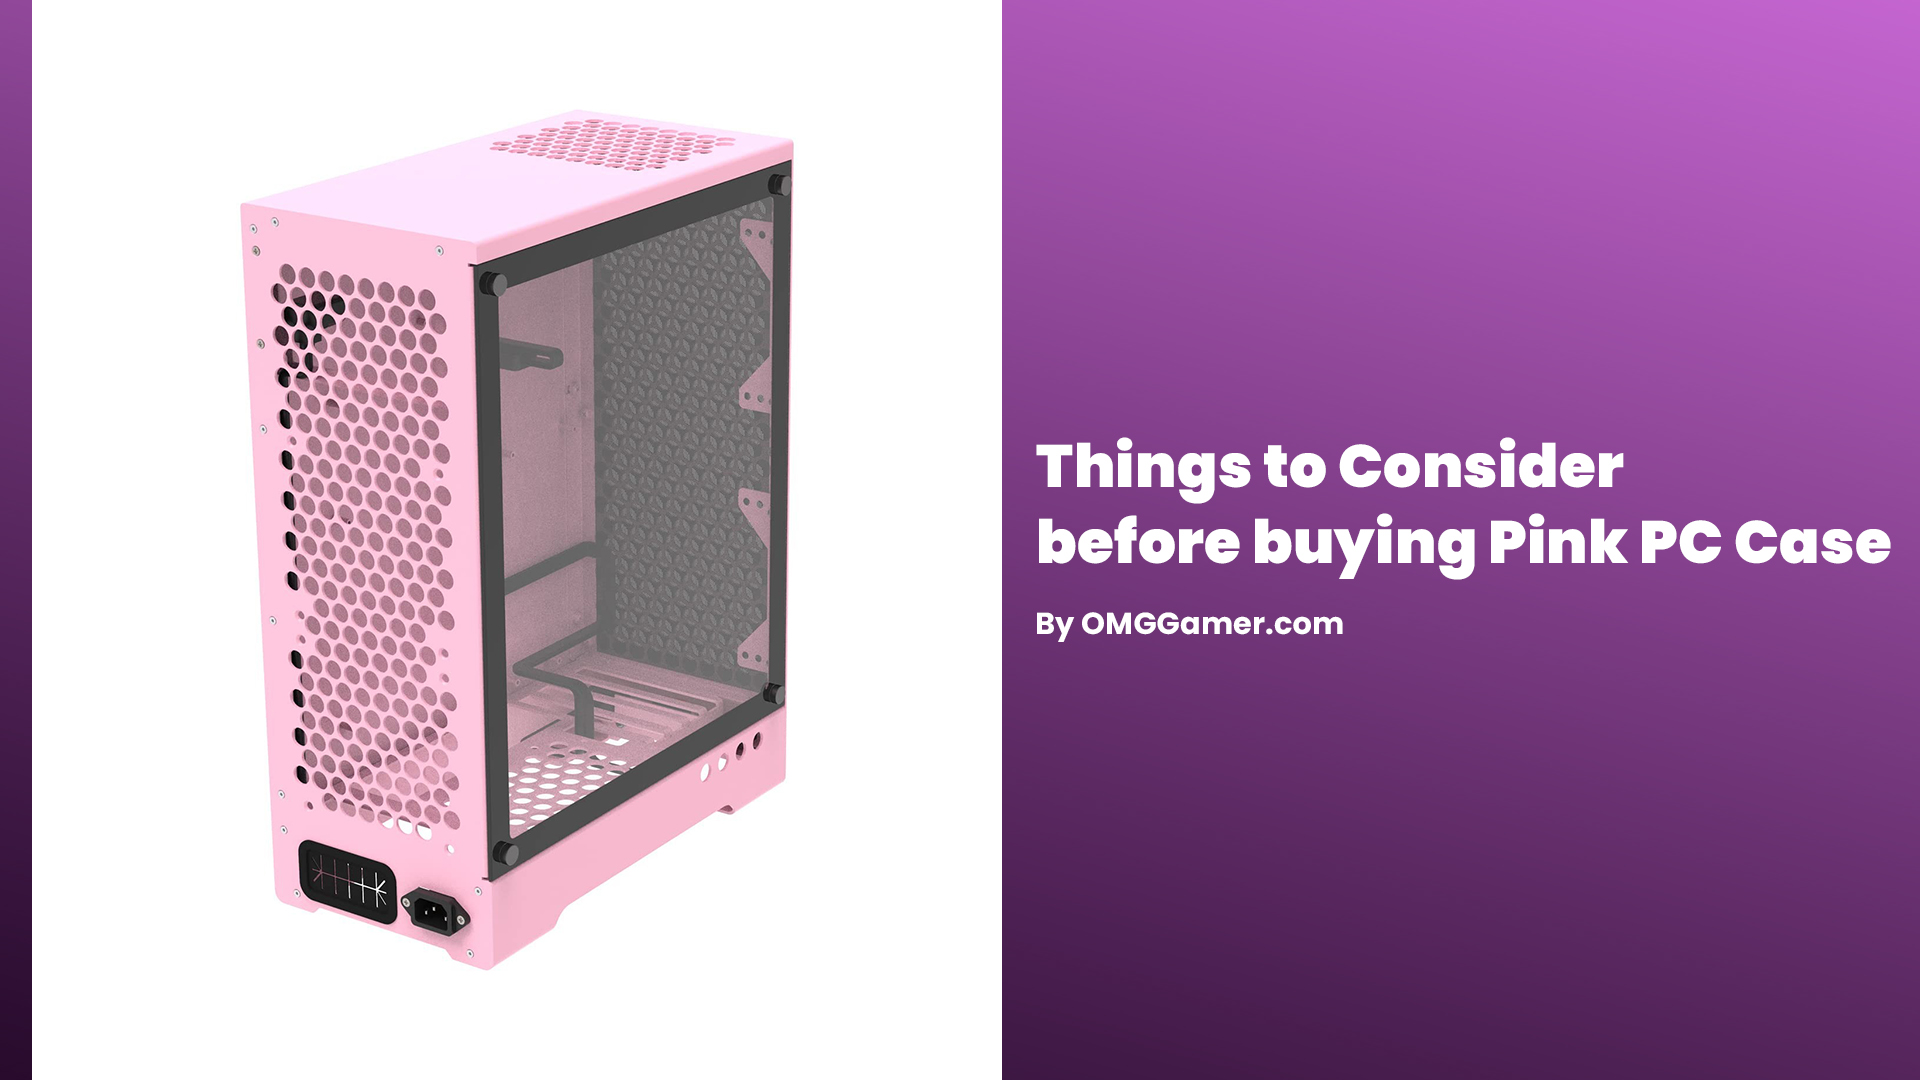 Things to Consider before buying Pink PC Case